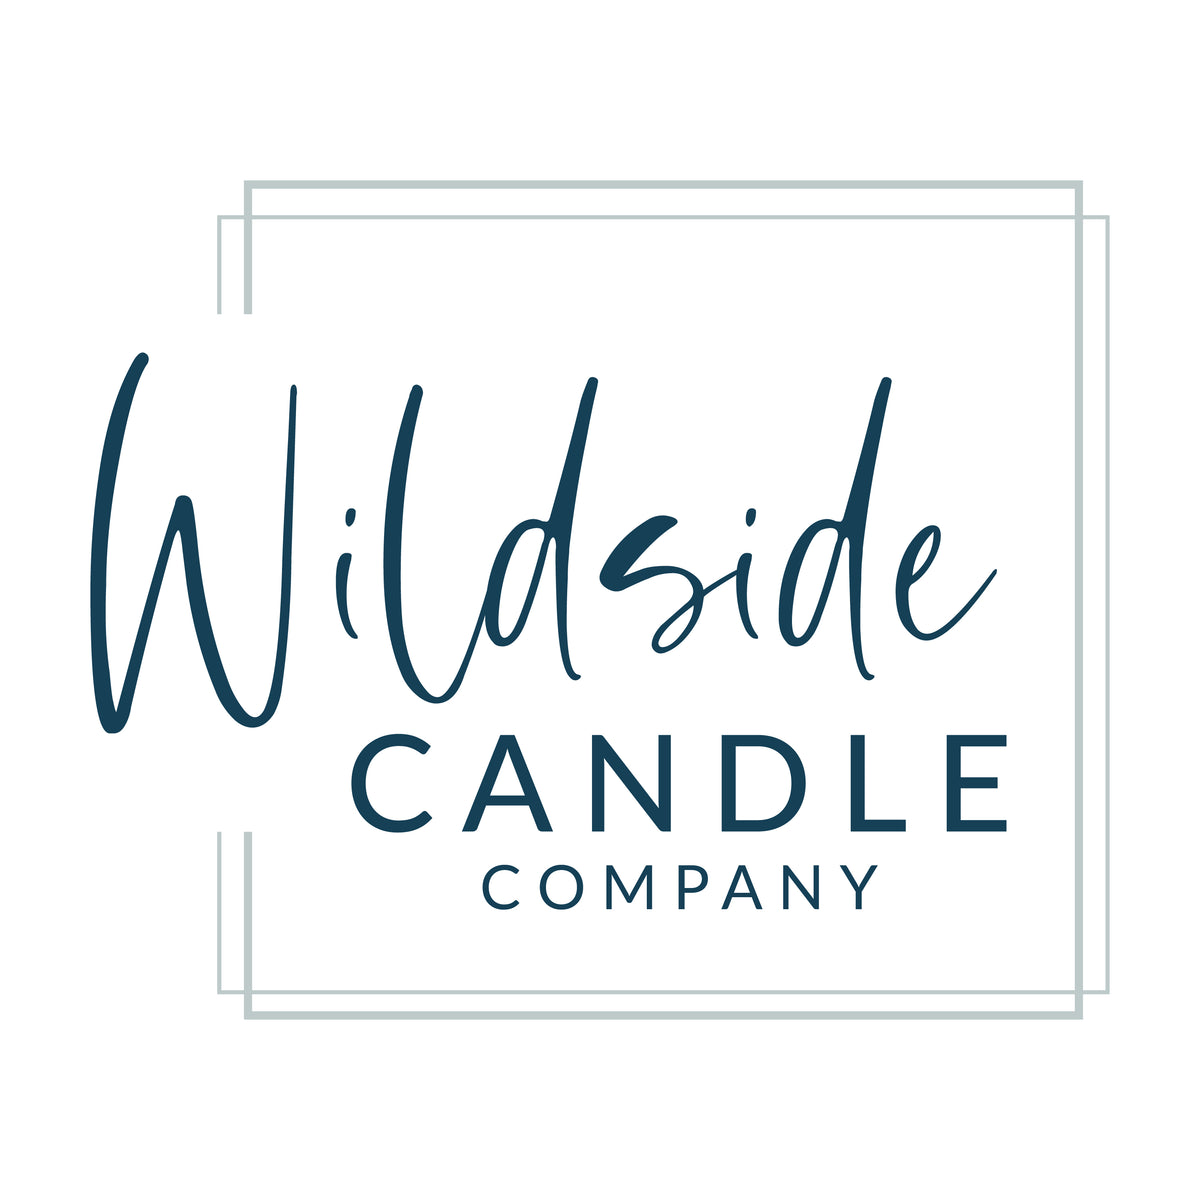 Wildside Candle Company